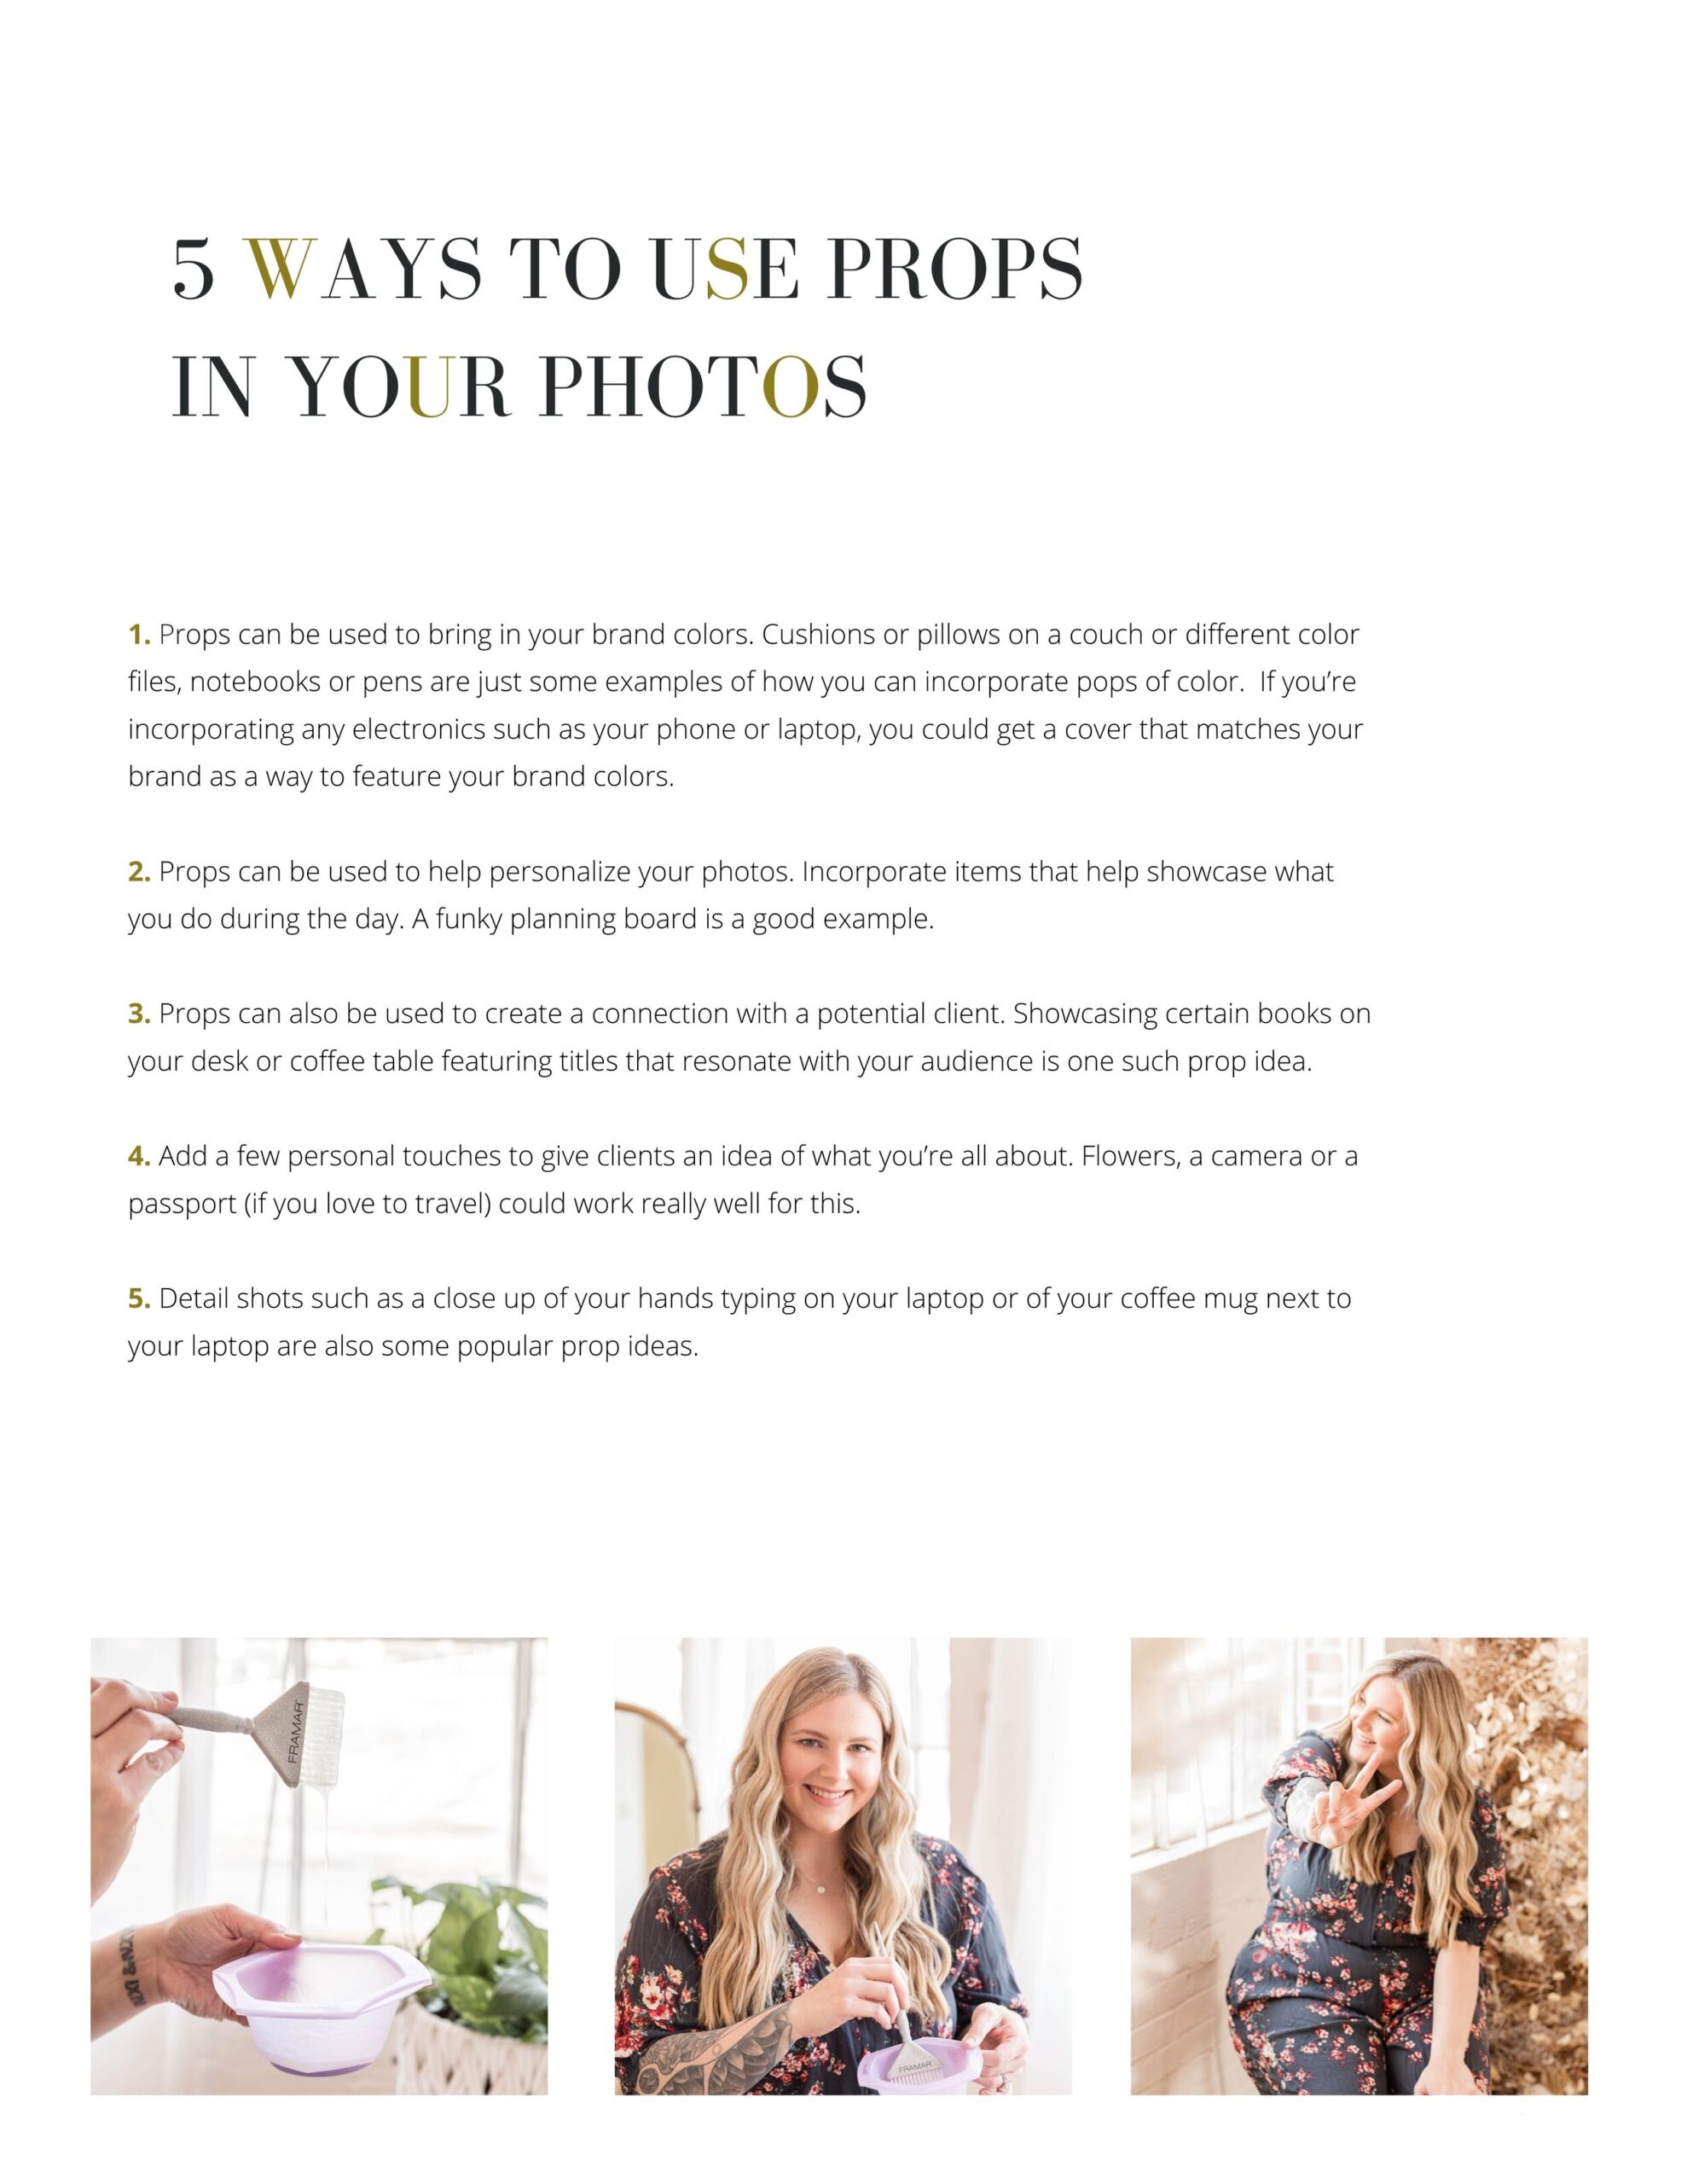 5 WAYS TO USE PROPS IN YOUR PHOTOS.jpg